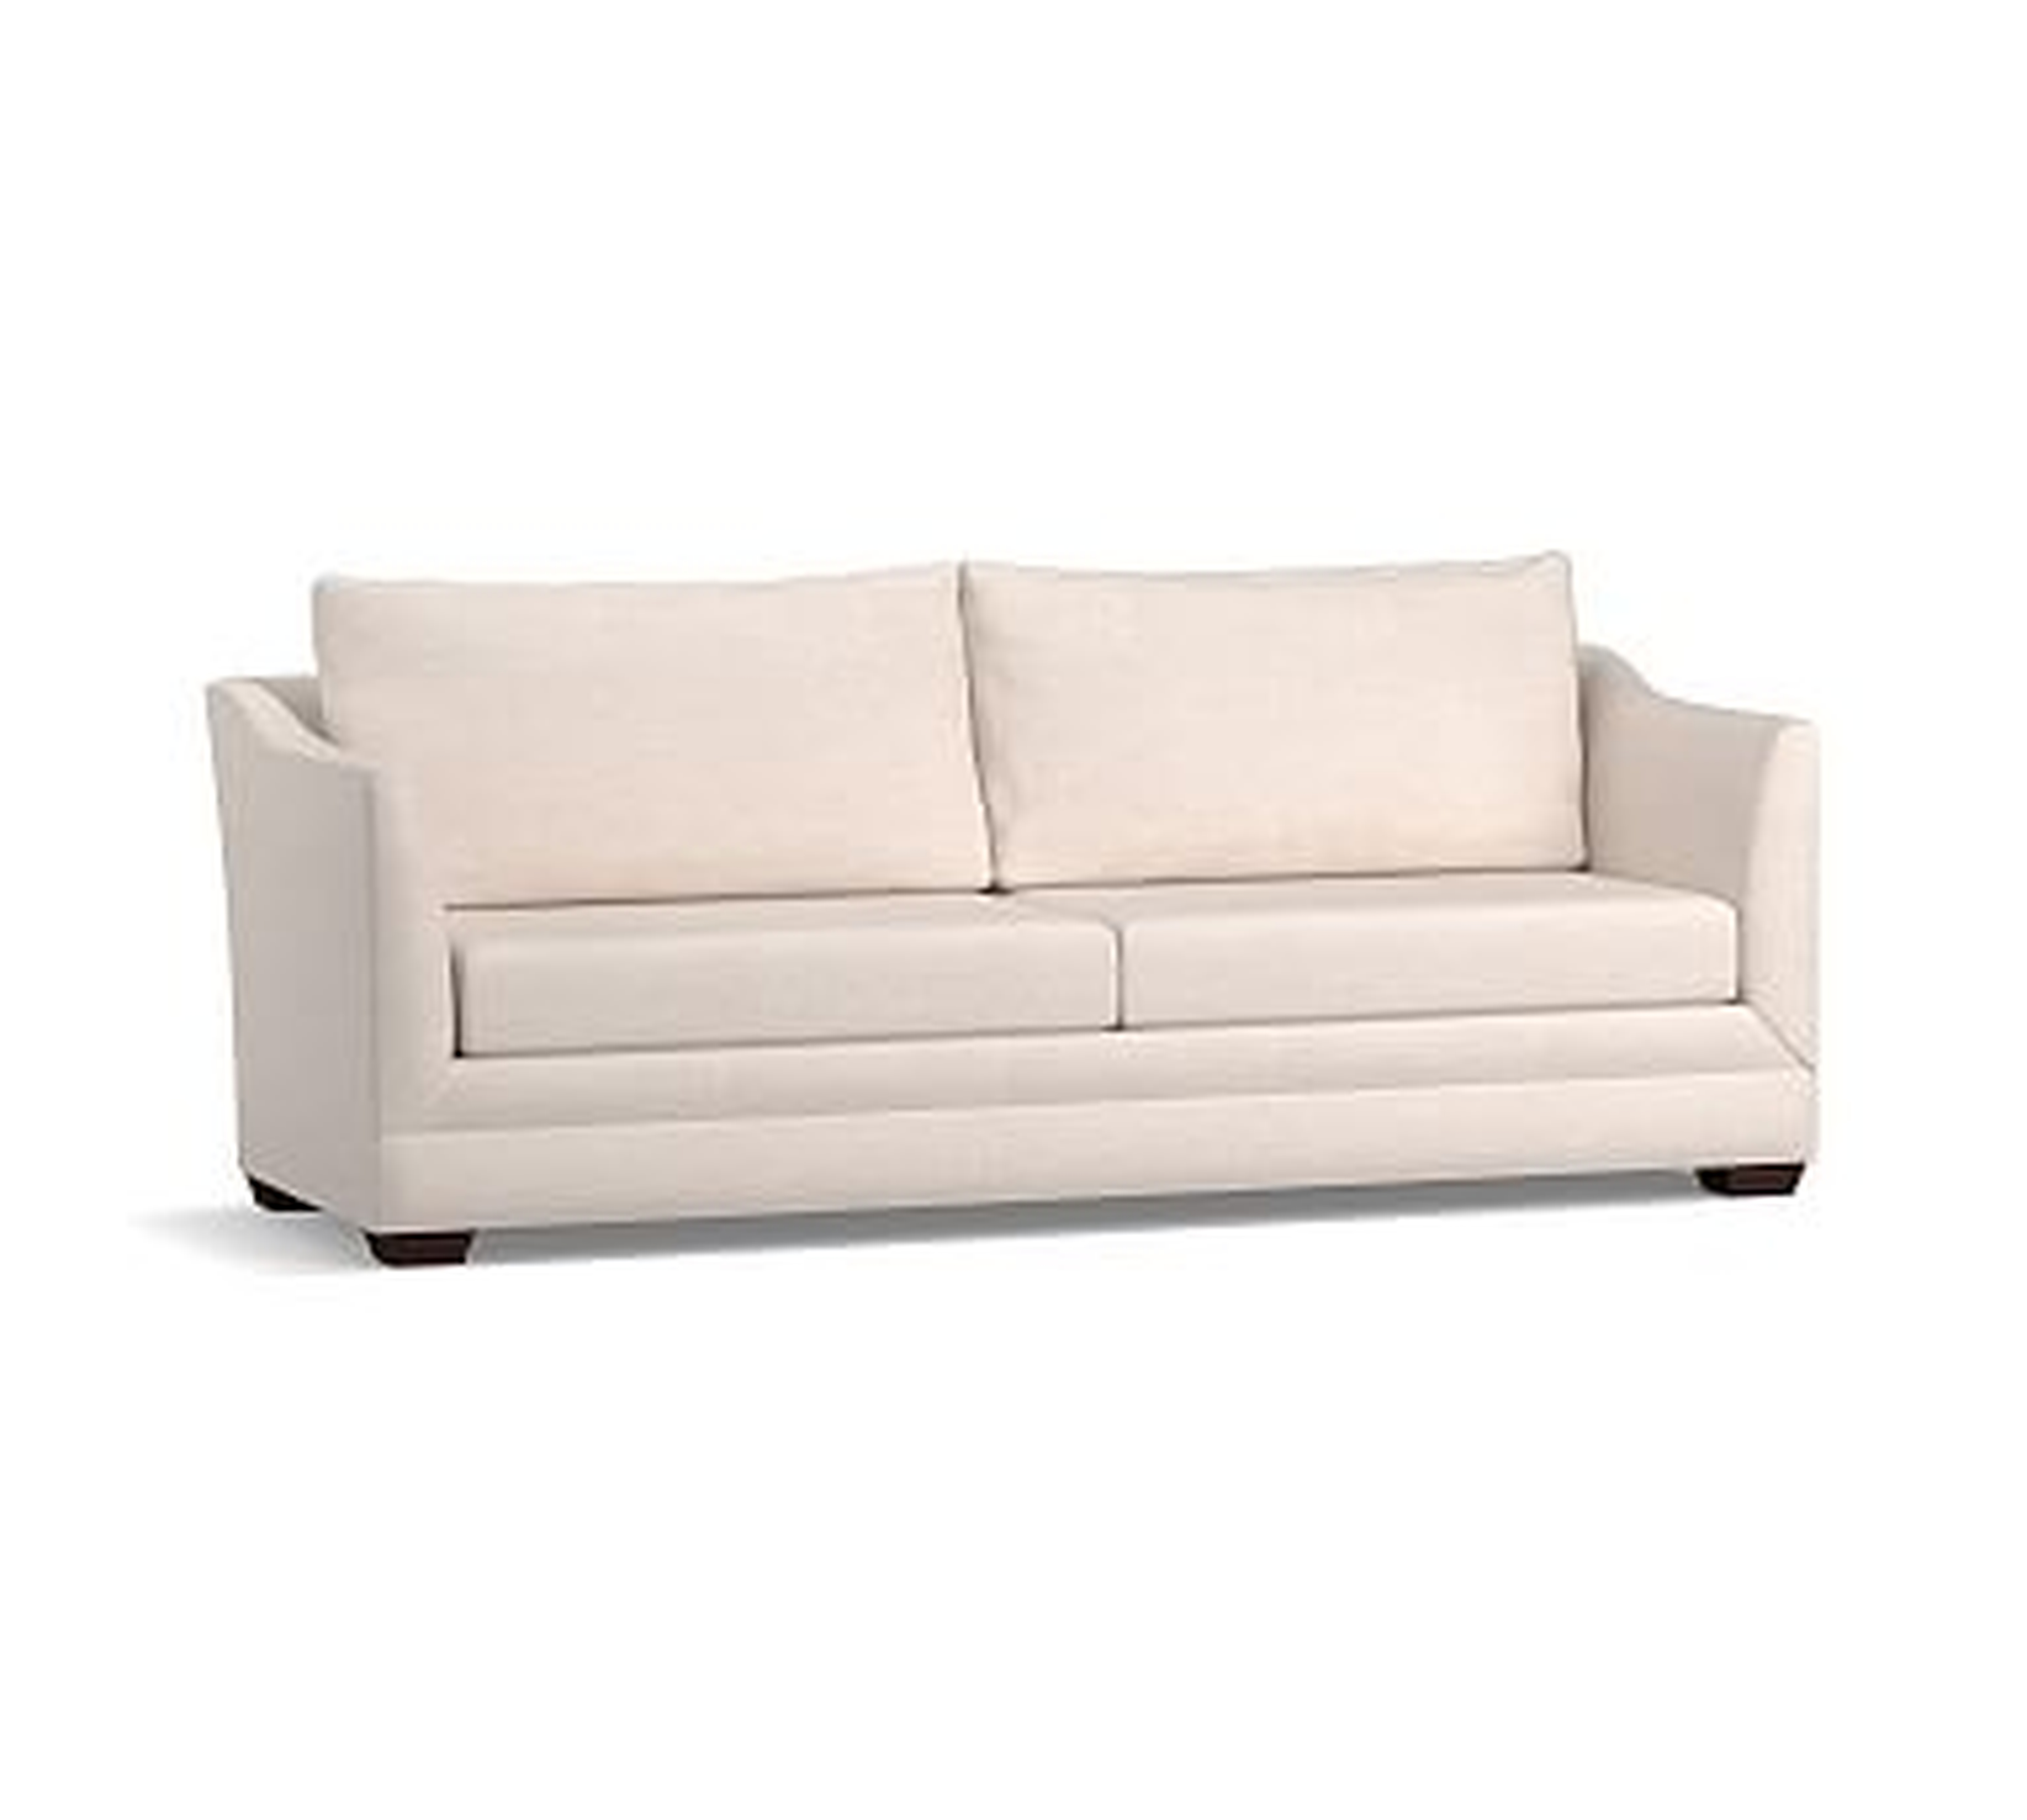 Celeste Upholstered Grand Sofa 86.5", Polyester Wrapped Cushions, Performance Twill Warm White - Pottery Barn